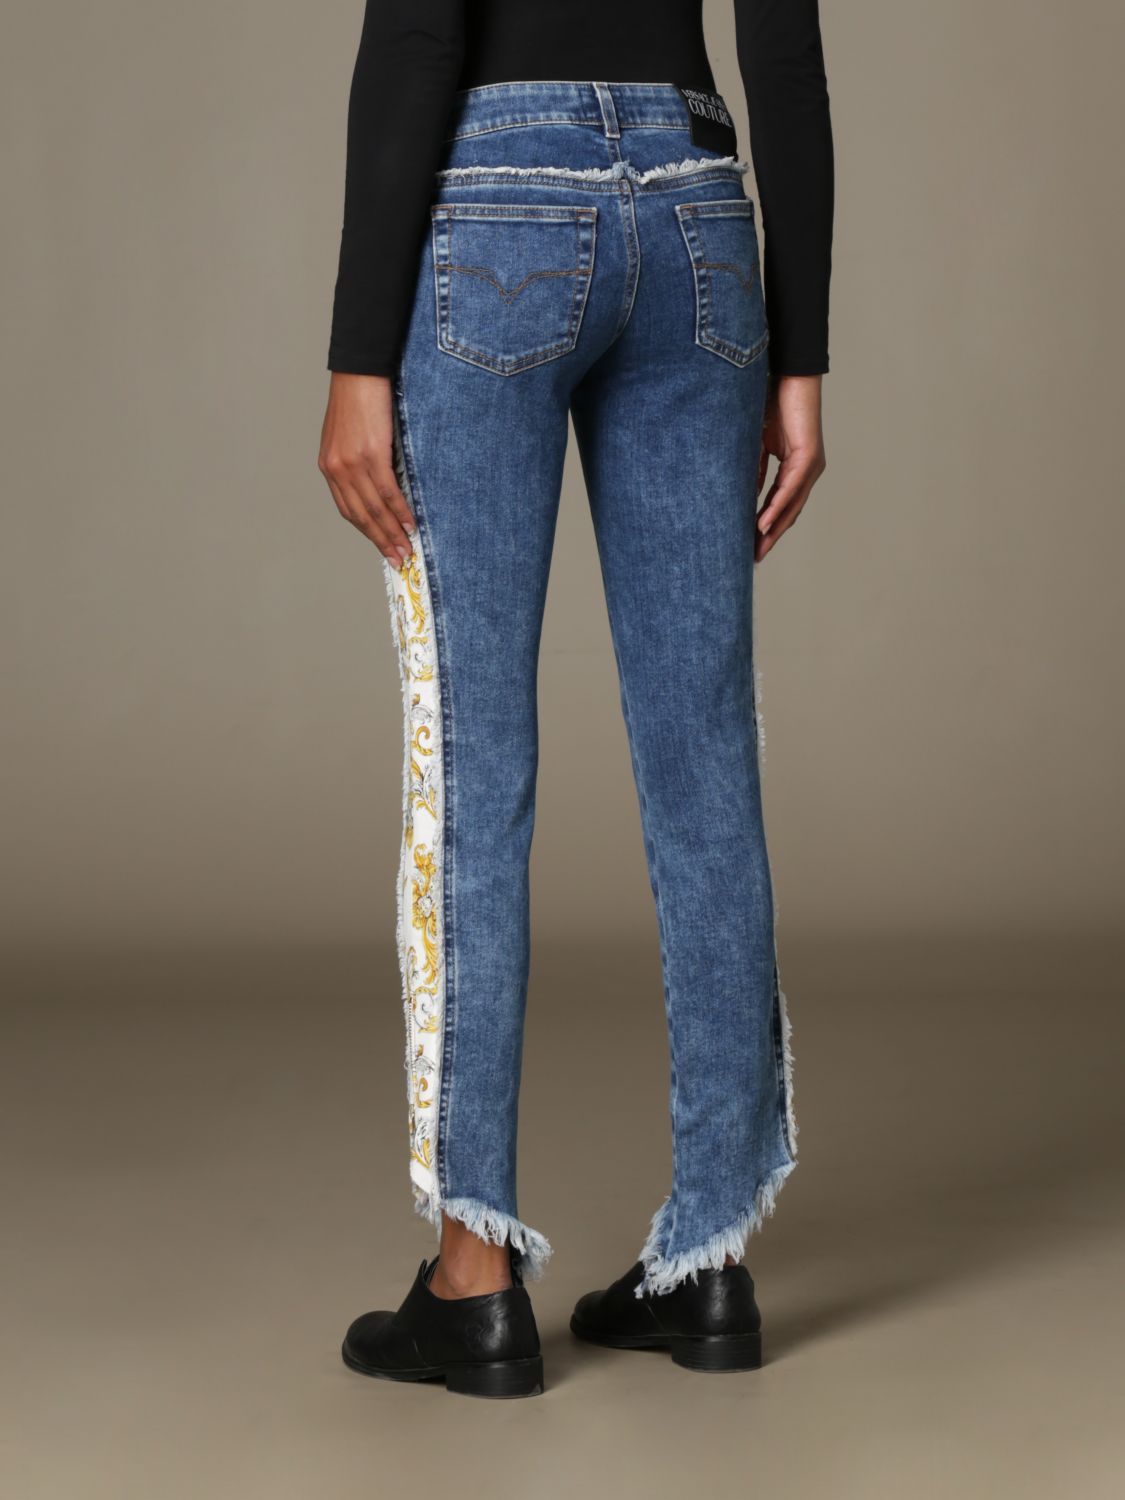 Women's Accessories  VERSACE Jeans Couture US